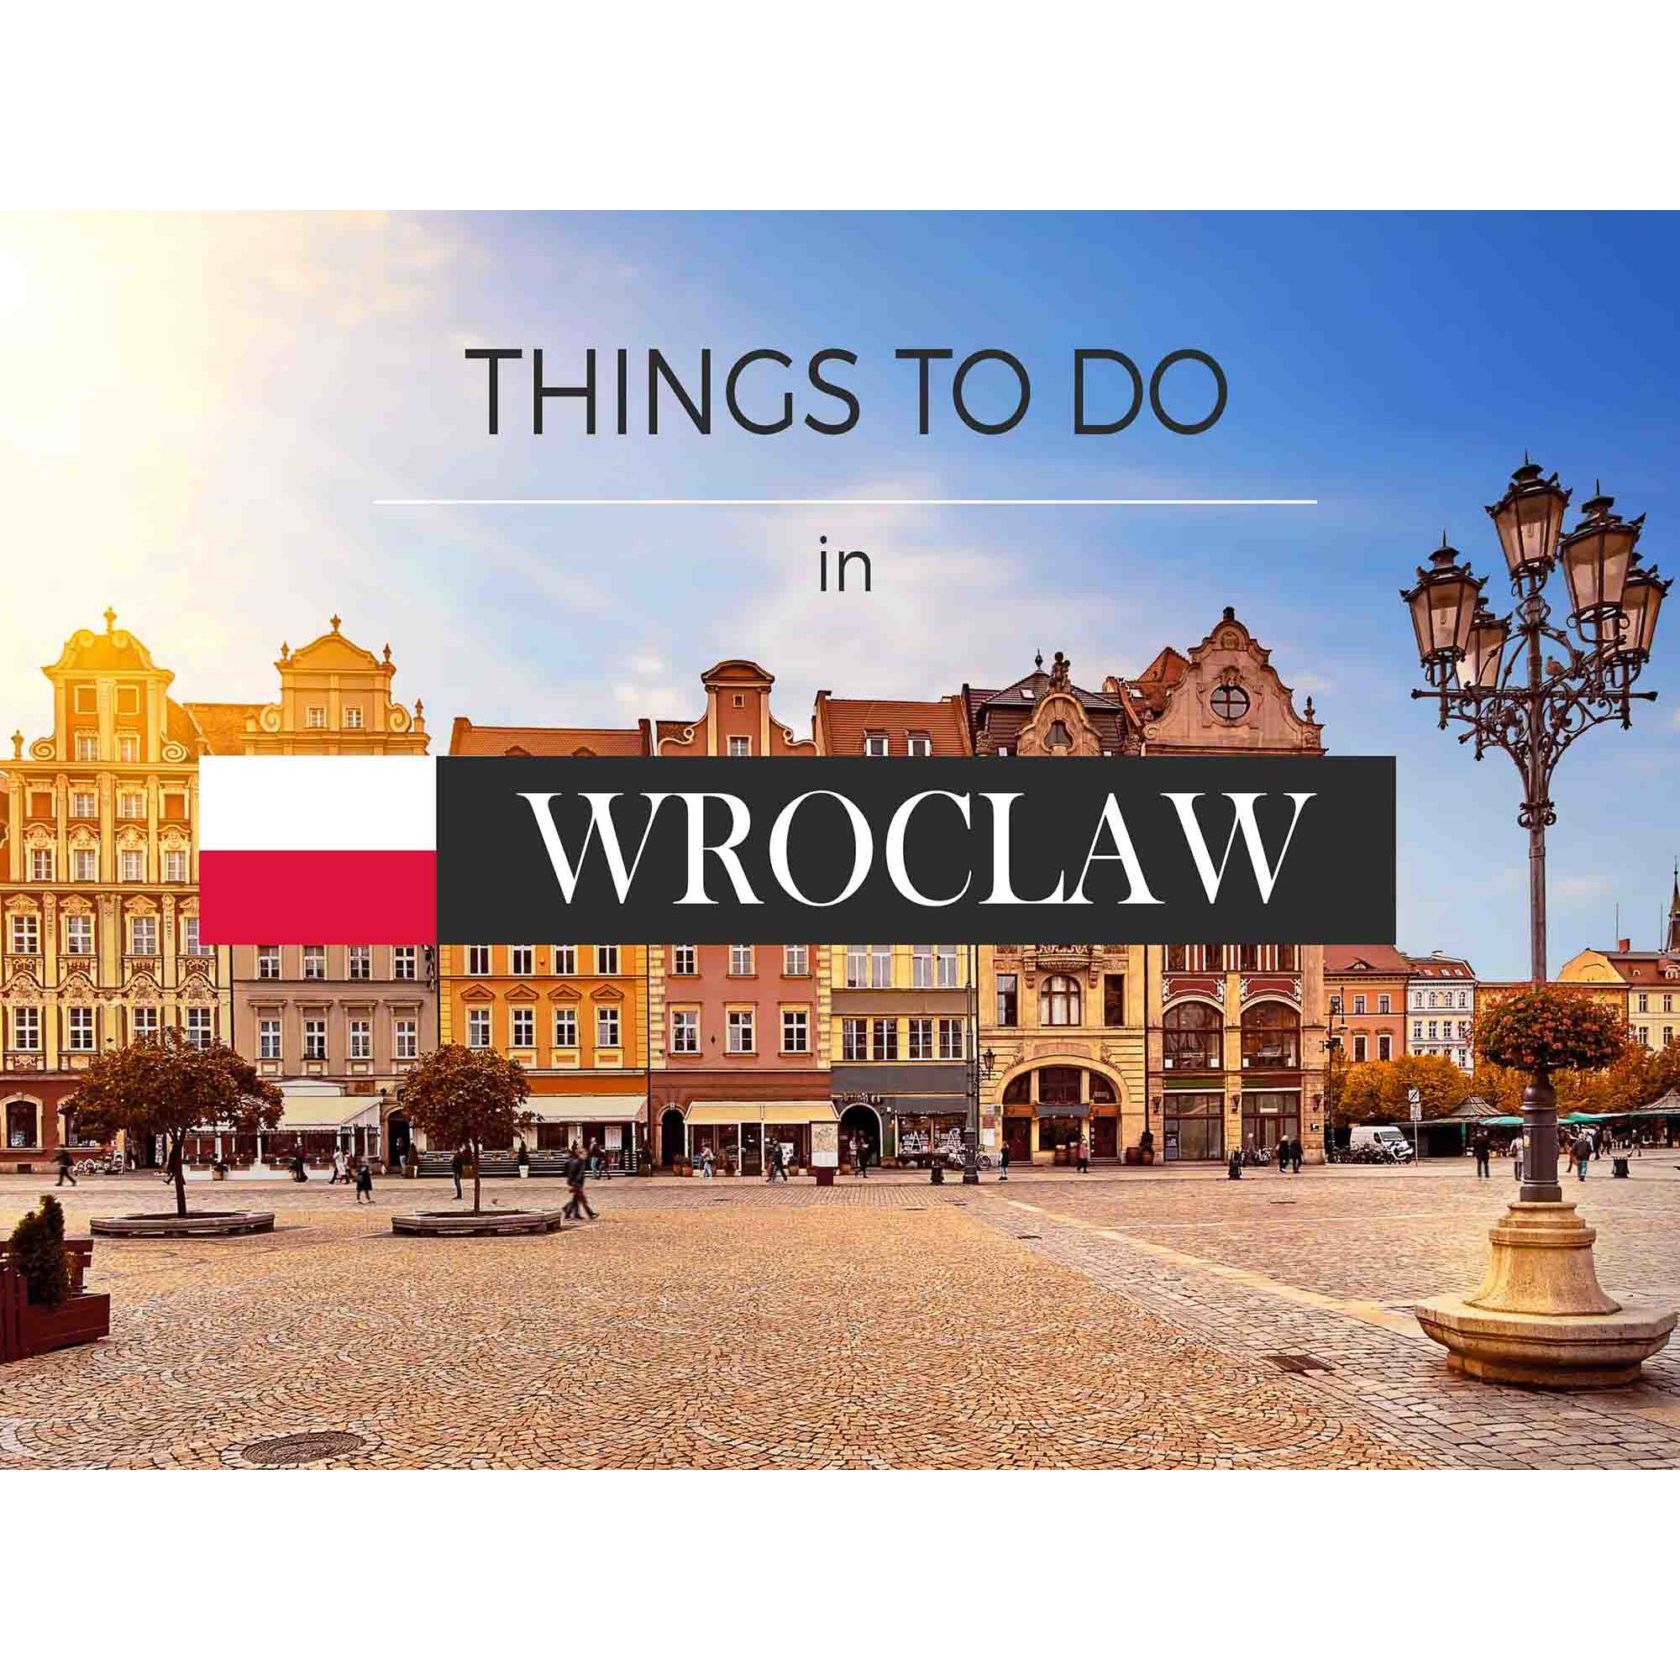 Things To Do in Wroclaw